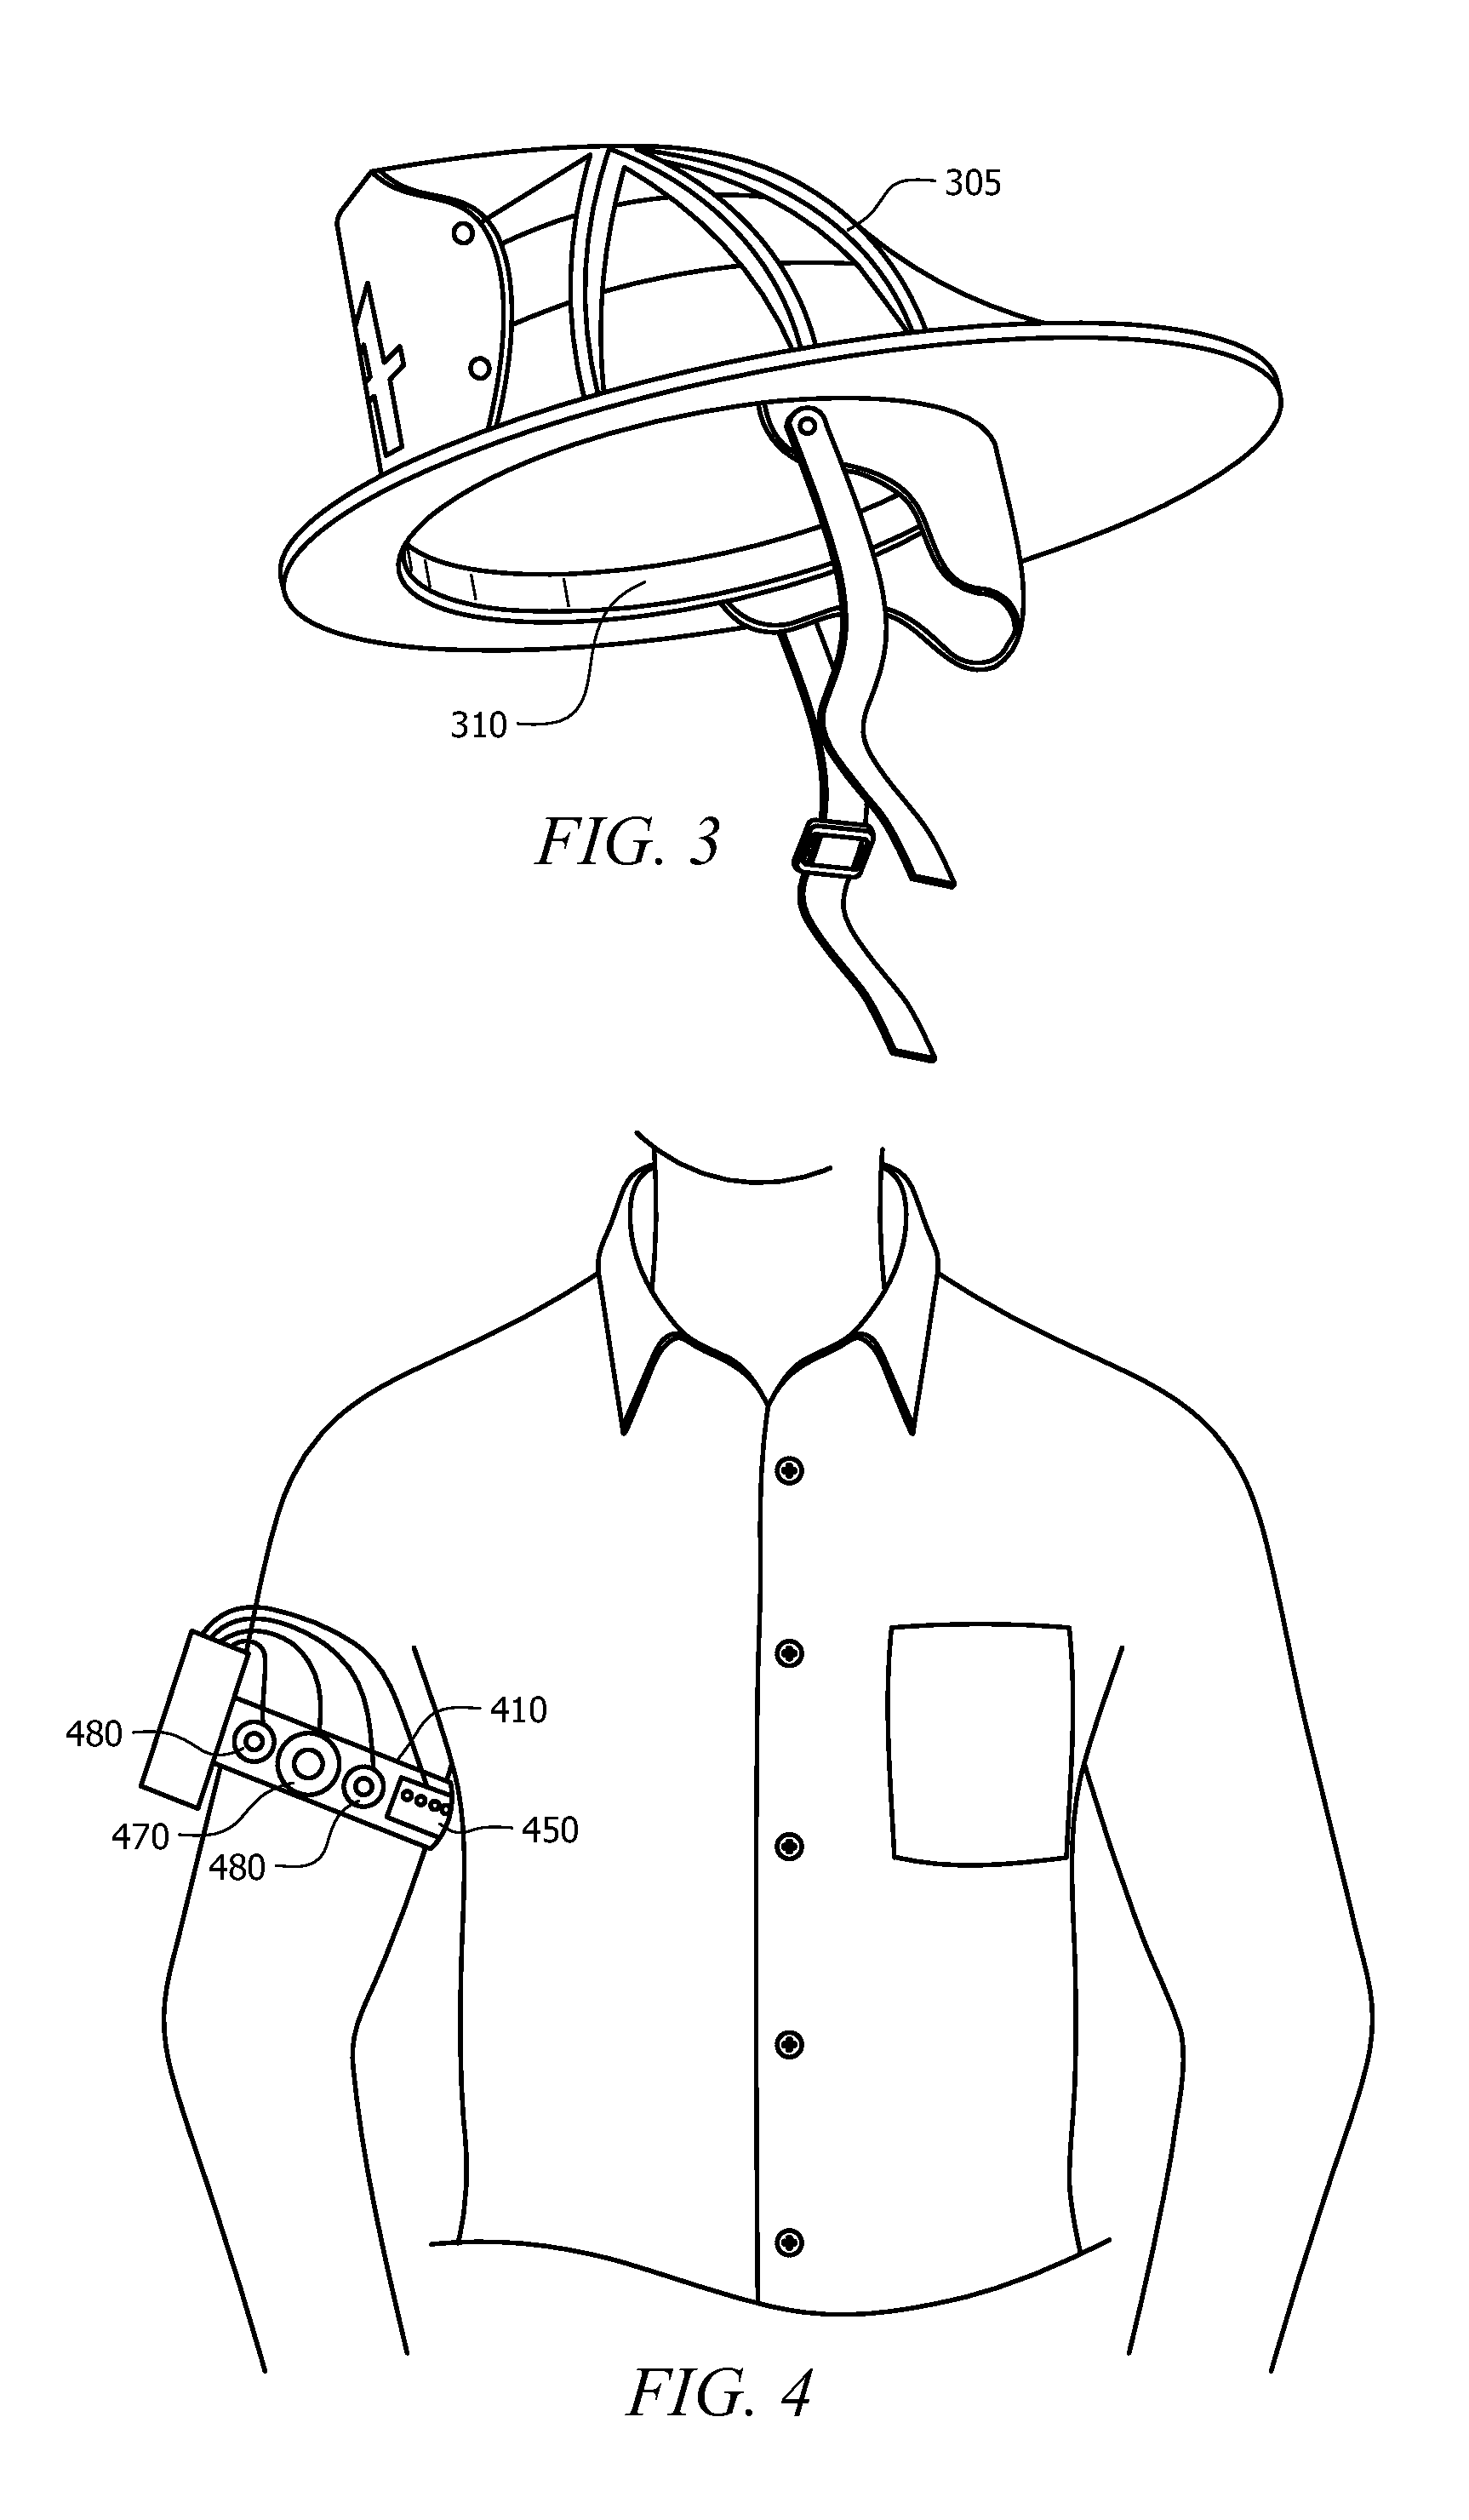 Personal Protective Equipment with Integrated Physiological Monitoring